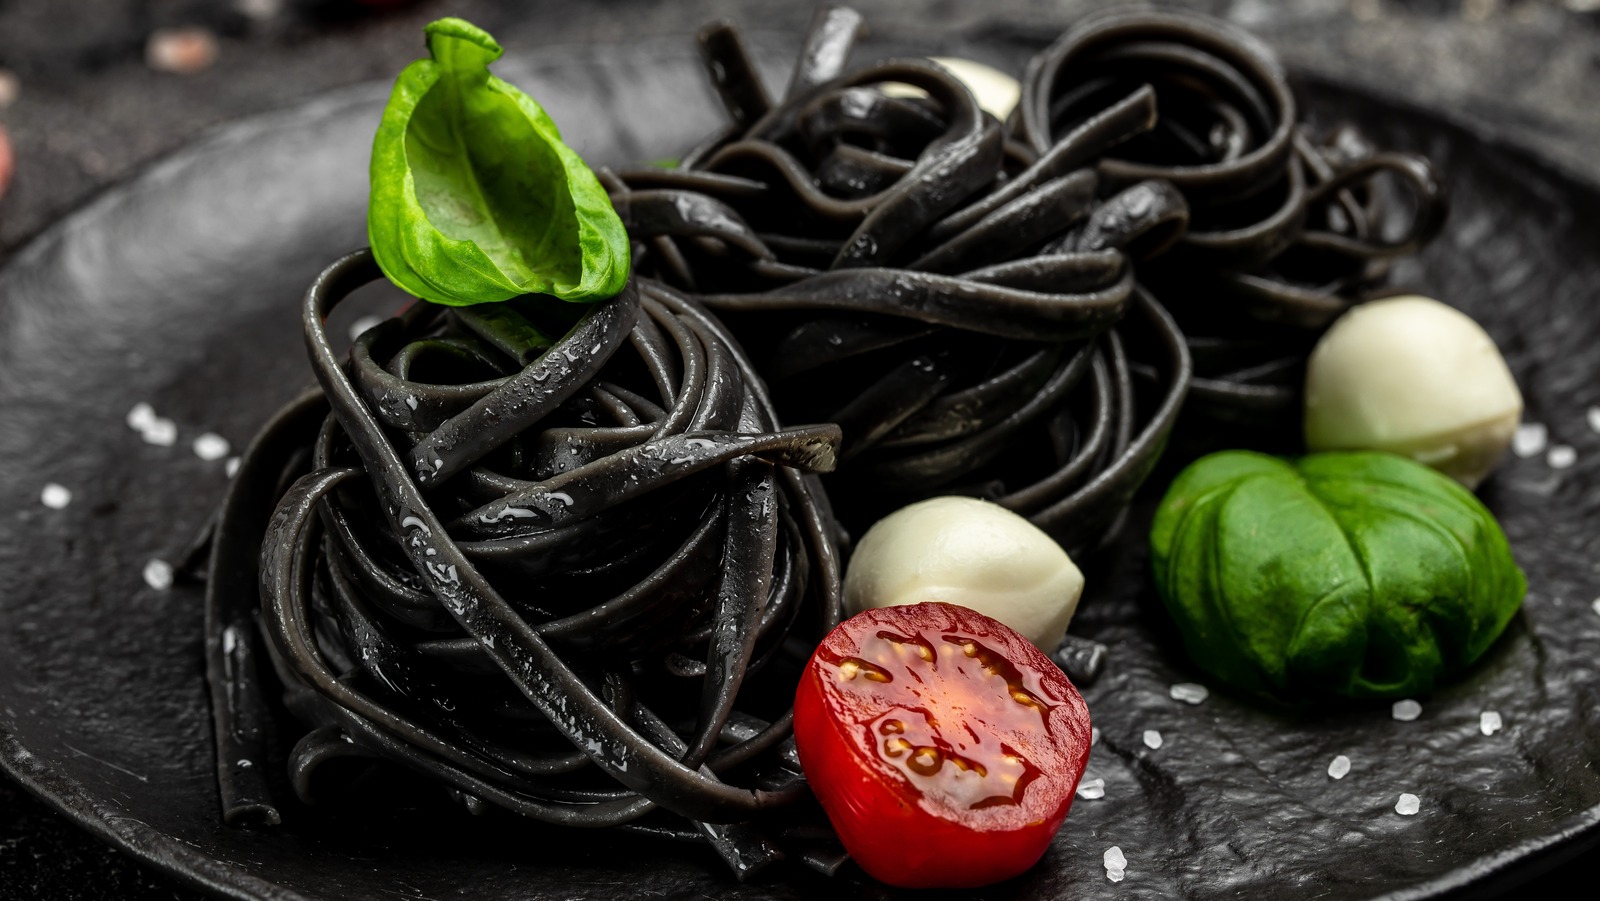 What Is The Flavor Of Squid Ink And Can You Taste It In Pasta? – The Daily Meal